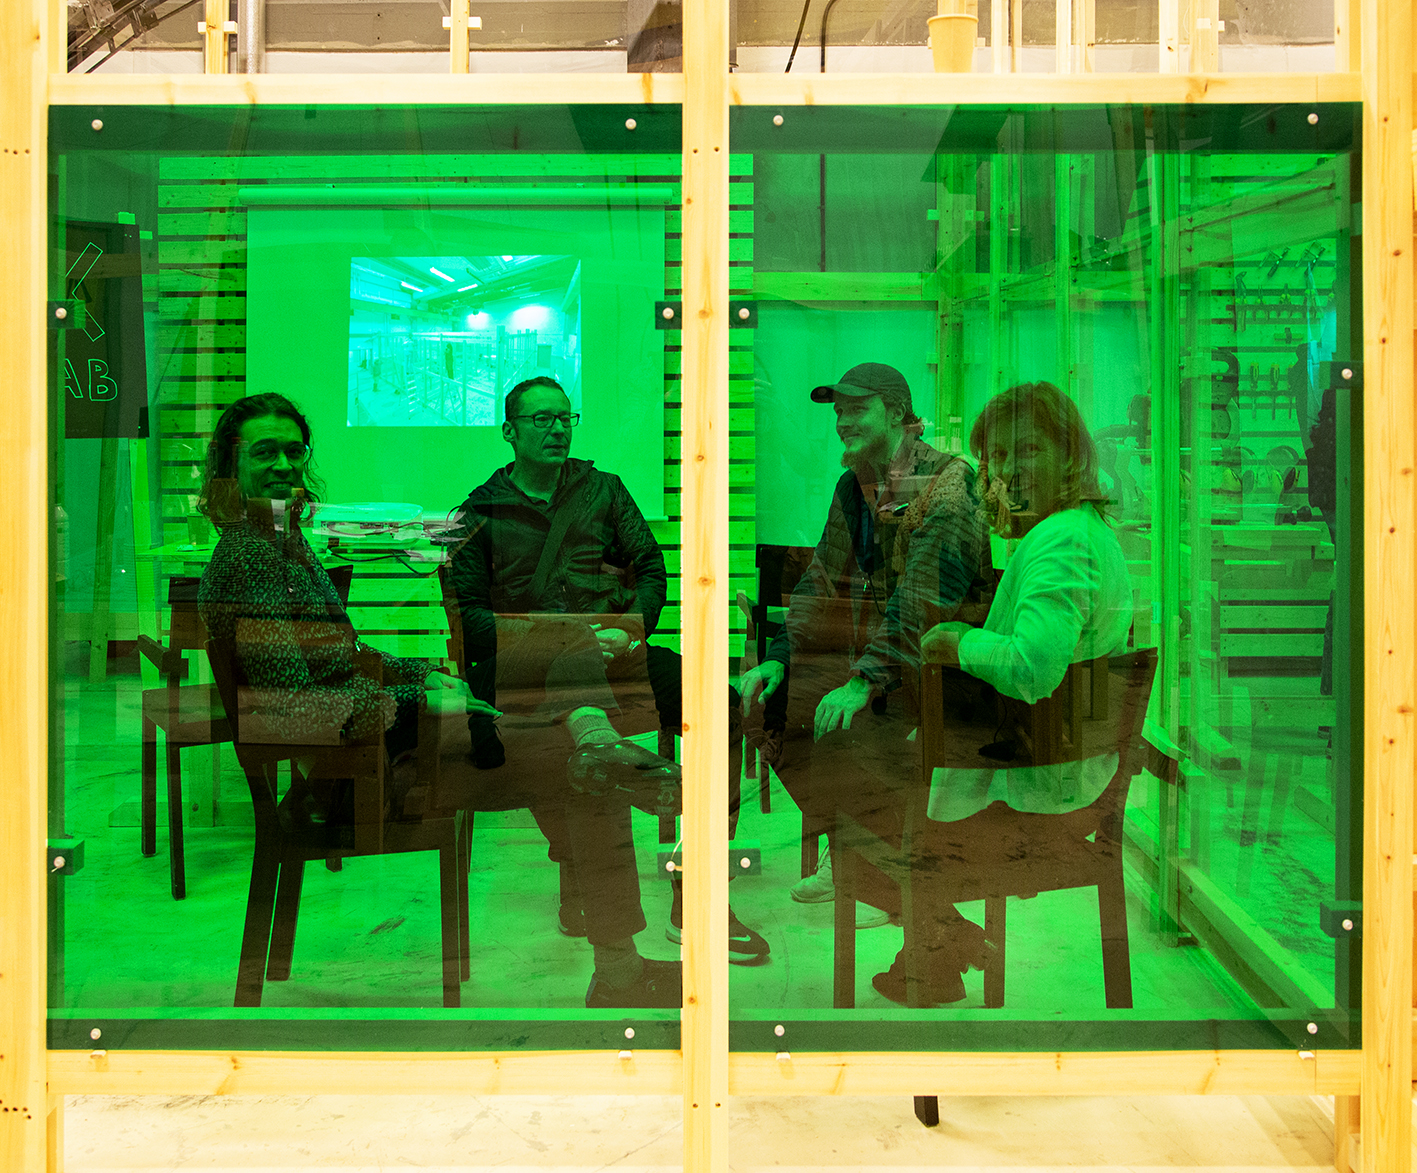 A group of people smiling and talking behind a green glass wall. Photo. 